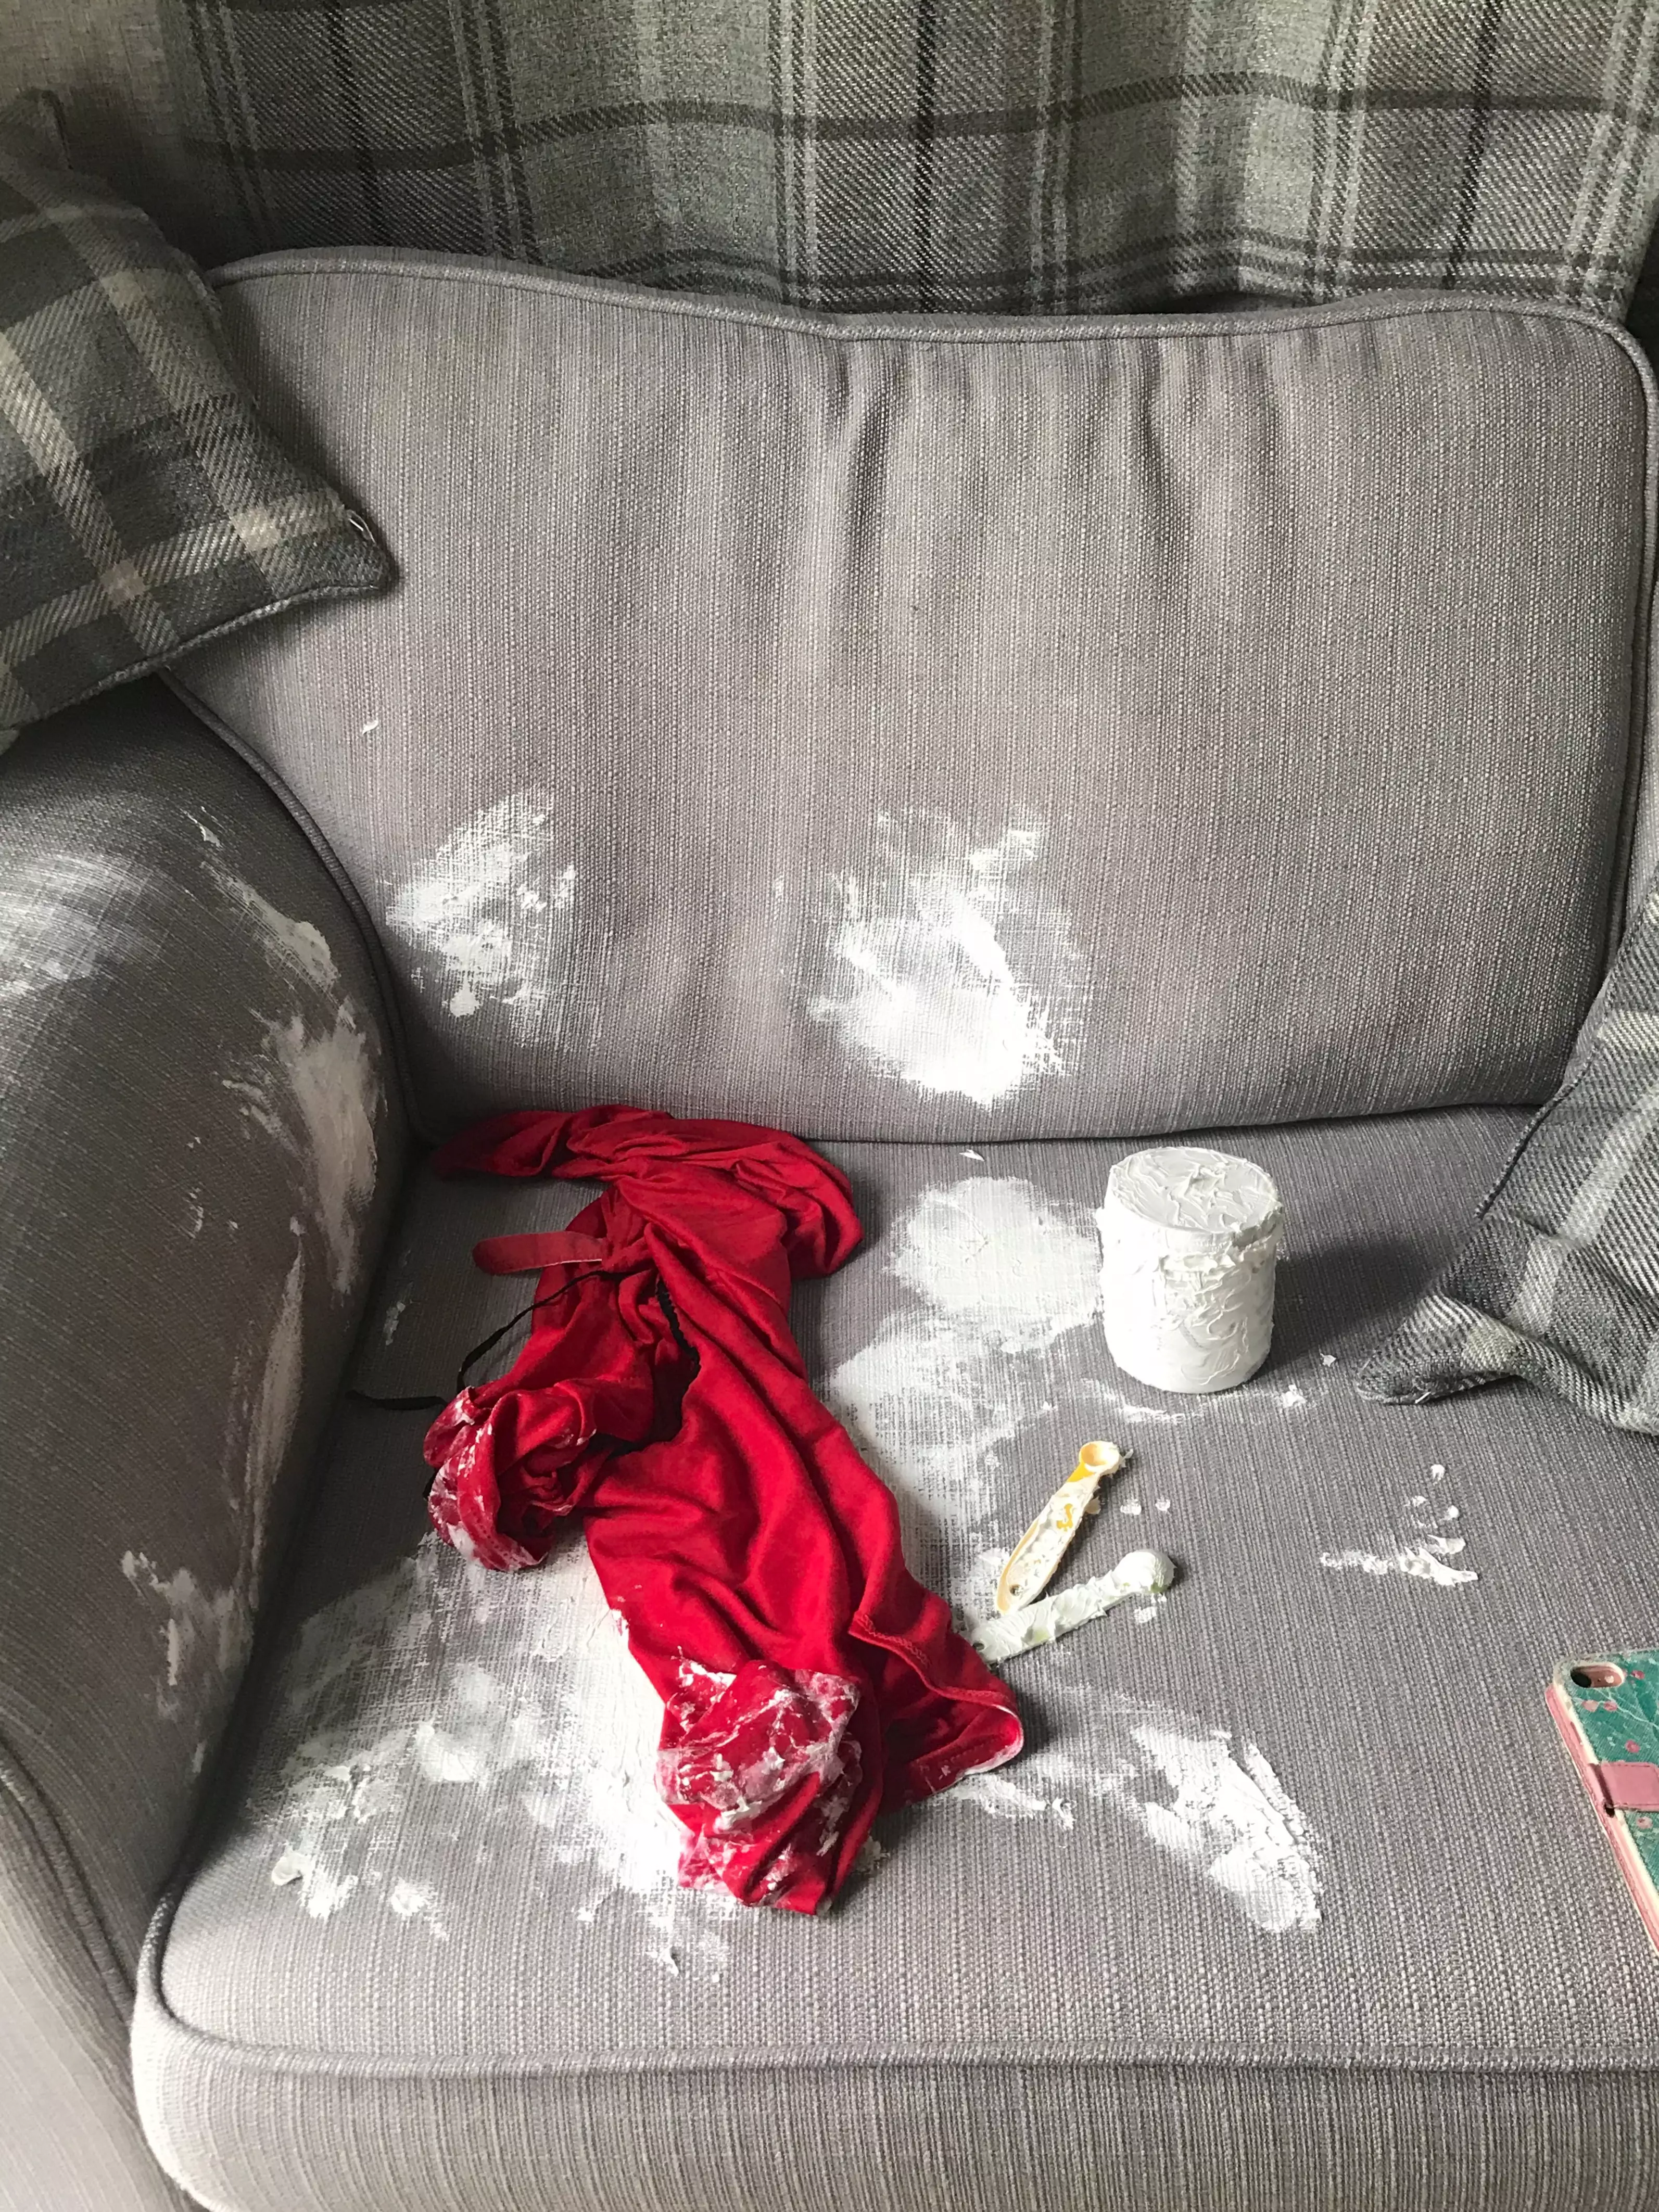 The sofa was left in a state (